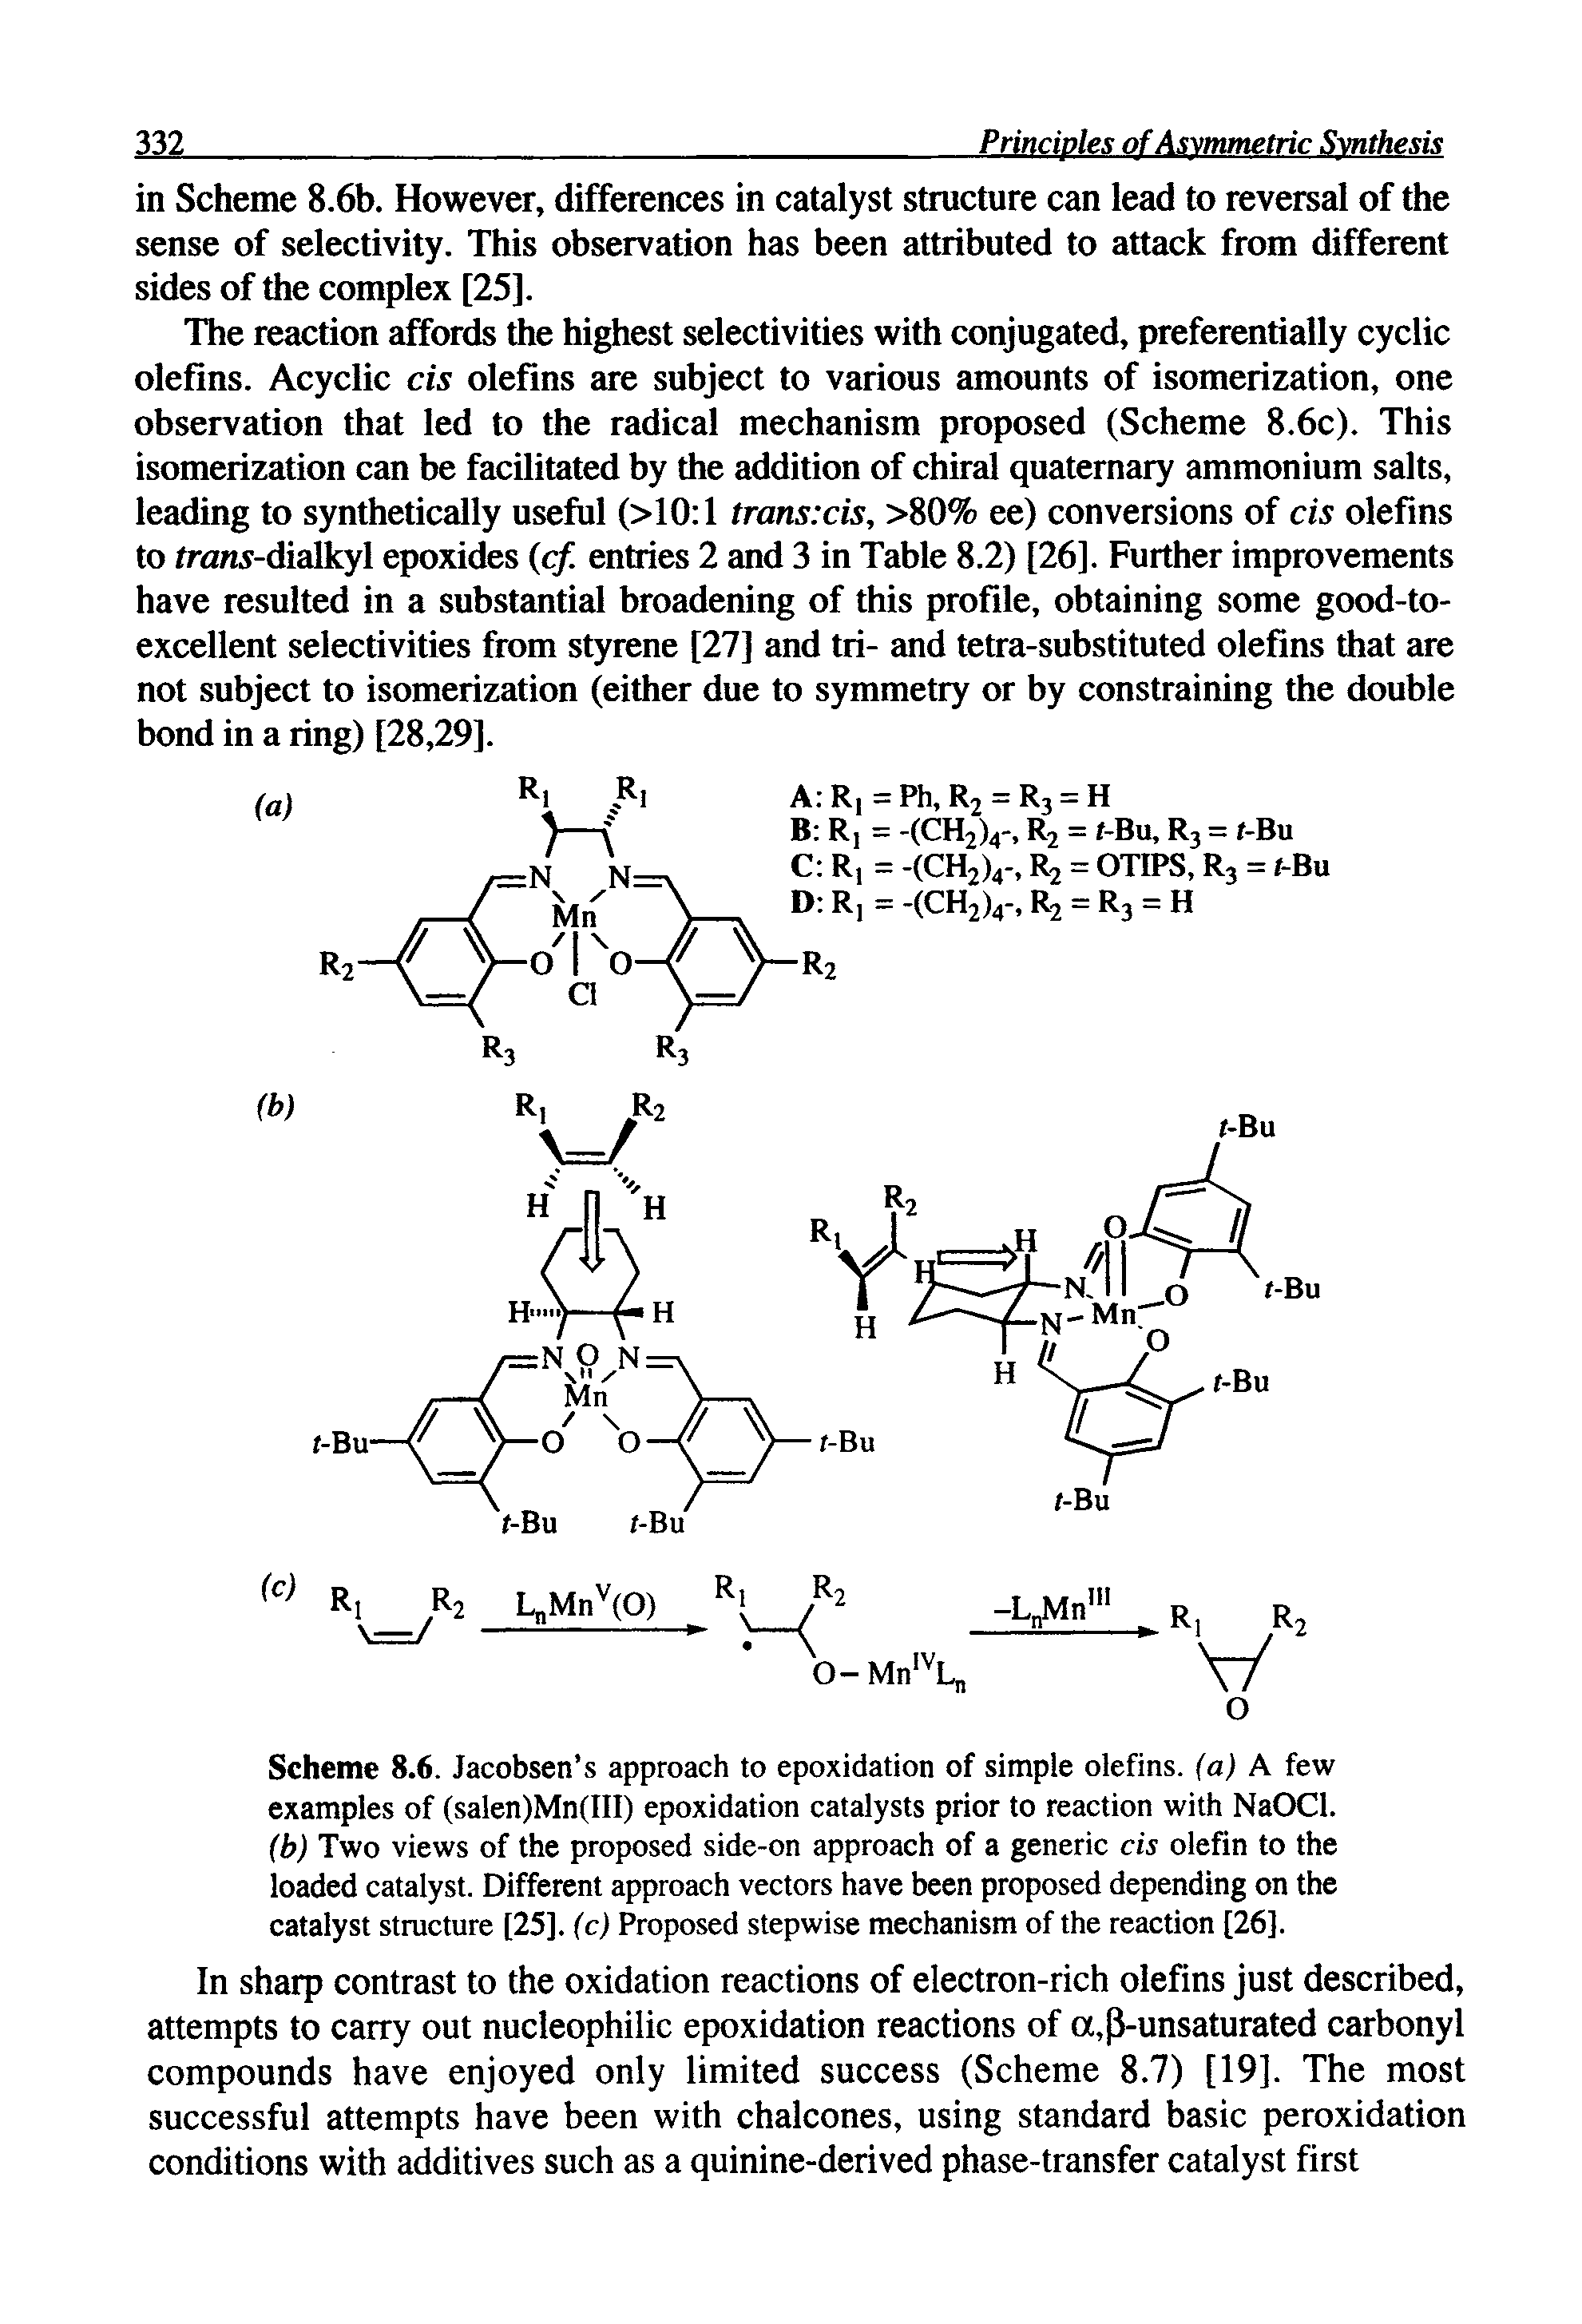 Scheme 8.6. Jacobsen s approach to epoxidation of simple olefins, fa) A few examples of (salen)Mn(III) epoxidation catalysts prior to reaction with NaOCl.